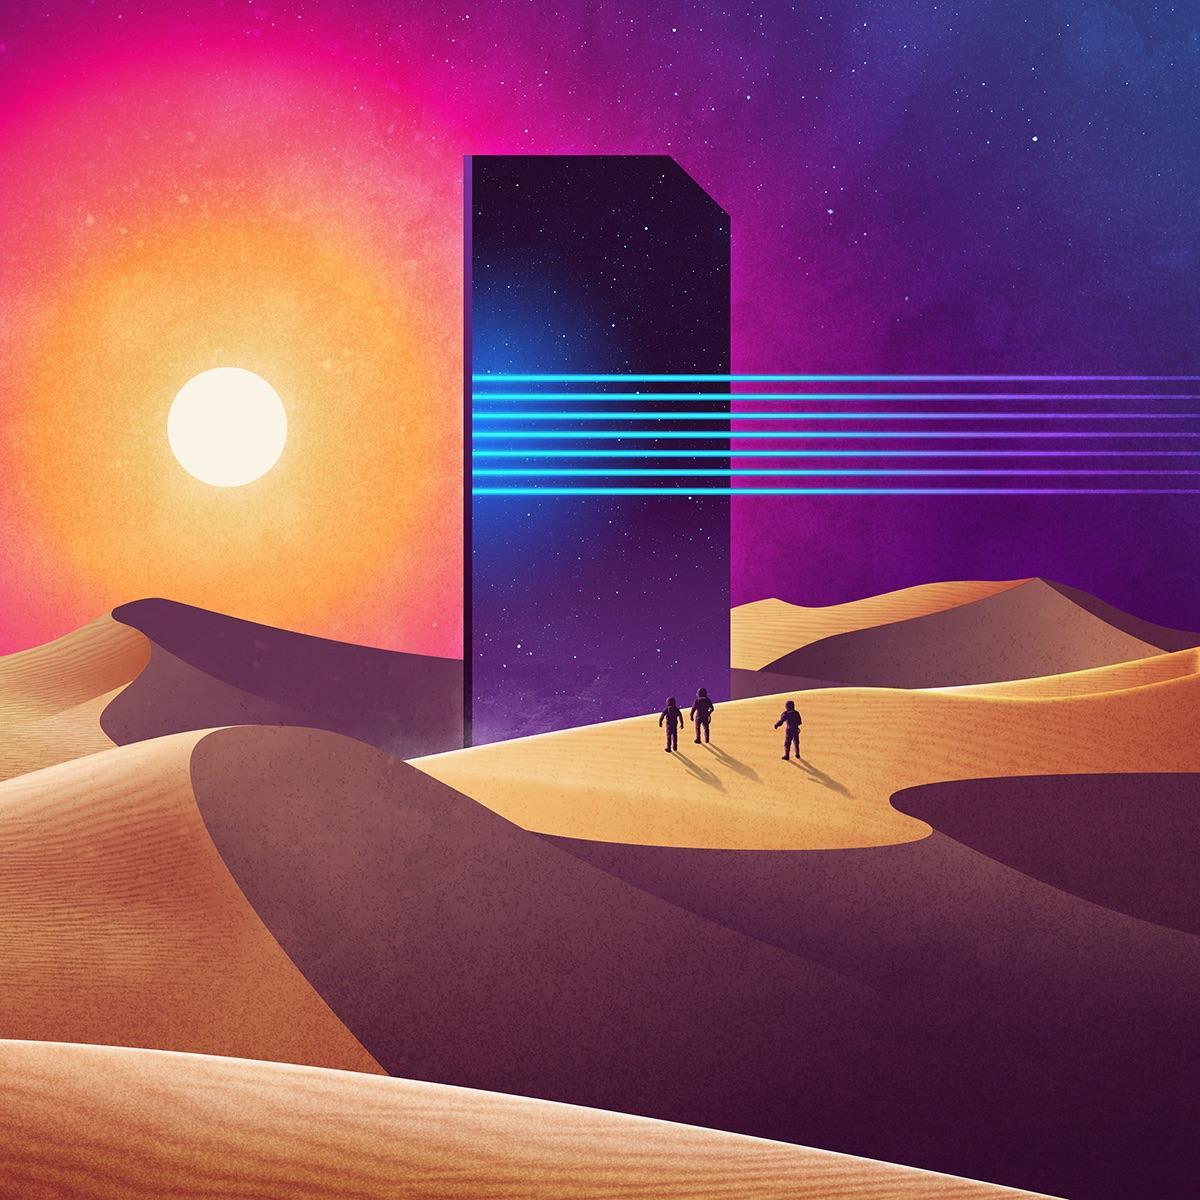 A mixture of science fiction landscapes and abstract monuments, part of James White's "Neowave Series"